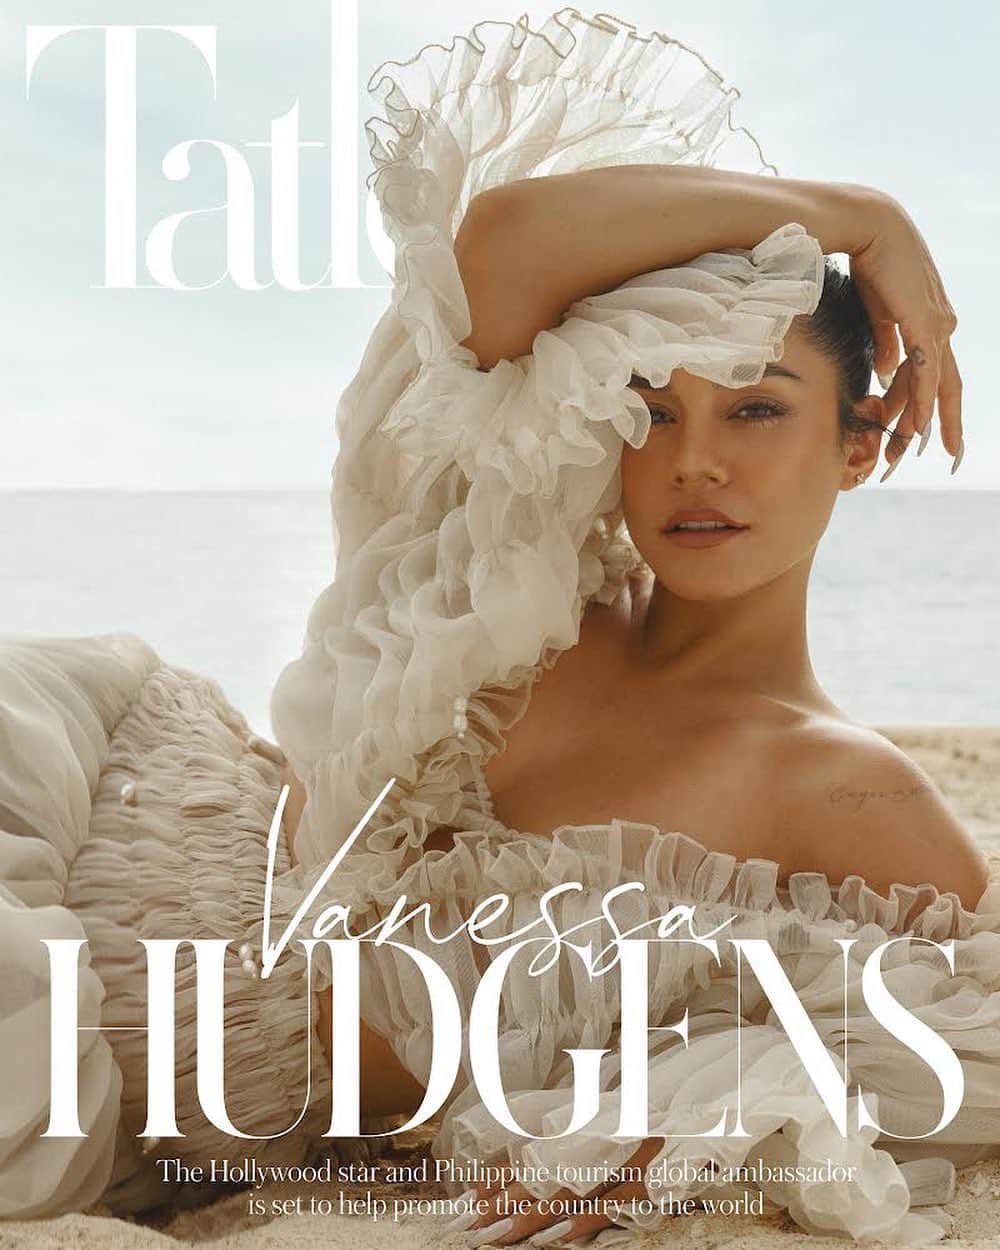 ヴァネッサ・ハジェンズのインスタグラム：「Our July issue celebrates Filipinos breaking boundaries and making their presence felt in their respective fields. Headlining this issue is the Hollywood superstar Vanessa Hudgens, whose journey to stardom started in 2006 when she had her big break playing the lead character, Gabriela Montez, in the hit TV film series “High School Musical”. Her meteoric rise to fame was unstoppable, continuing over the years with more top-rated projects such as Netflix’s rom-com trilogy, “The Princess Switch” and the 2021 American biographical musical film “Tick, Tick... Boom!”, and most recently, the provocative supernatural documentary, “Dead Hot: Season of the Witch”. Her phenomenal success in the international entertainment scene has brought so much pride and joy to many Filipinos worldwide.  This year, @vanessahudgens took on one of her most significant roles as the Philippines’ global tourism ambassador. In that capacity, she is set to promote the country’s rich culture and beautiful destinations to the world using her voice and platform. She will also star in a yet-to-be-named travel documentary shot in the Philippines by the prolific filmmaker and Presidential Adviser for Creative Communications Secretary Paul Soriano paulsoriano1017.  Together with her mother, Gina Guanco Hudgens, and her sister, Stella, Tatler tagged along Vanessa as she explored and experienced the idyllic island paradise of El Nido during her homecoming. She summed up her experience by saying, “It’s got a bit of everything. It’s got a metropolitan city. It’s got paradise. It’s beautiful and eye-opening. From early morning hikes to sunset cocktails and karaoke, and catamaran rides… It’s got kindness. Everybody is warm and friendly. The people here are unique. I haven’t met anyone who seems to be having a bad day. The hospitality is unmatched. It’s a magical place,” Vanessa said   Photography @bjpascual  Gown @vaniaromoff  Styling @lizzzuy / @stylizedstudio  Words @matetreyes  Interview @boyabunda  Hair @hairbynanteywest  Make-up @stevendoloso  Assistant Stylists @joyybernardo and @jolobayoneta / Stylized Studio  Location @pangulasianparadise」